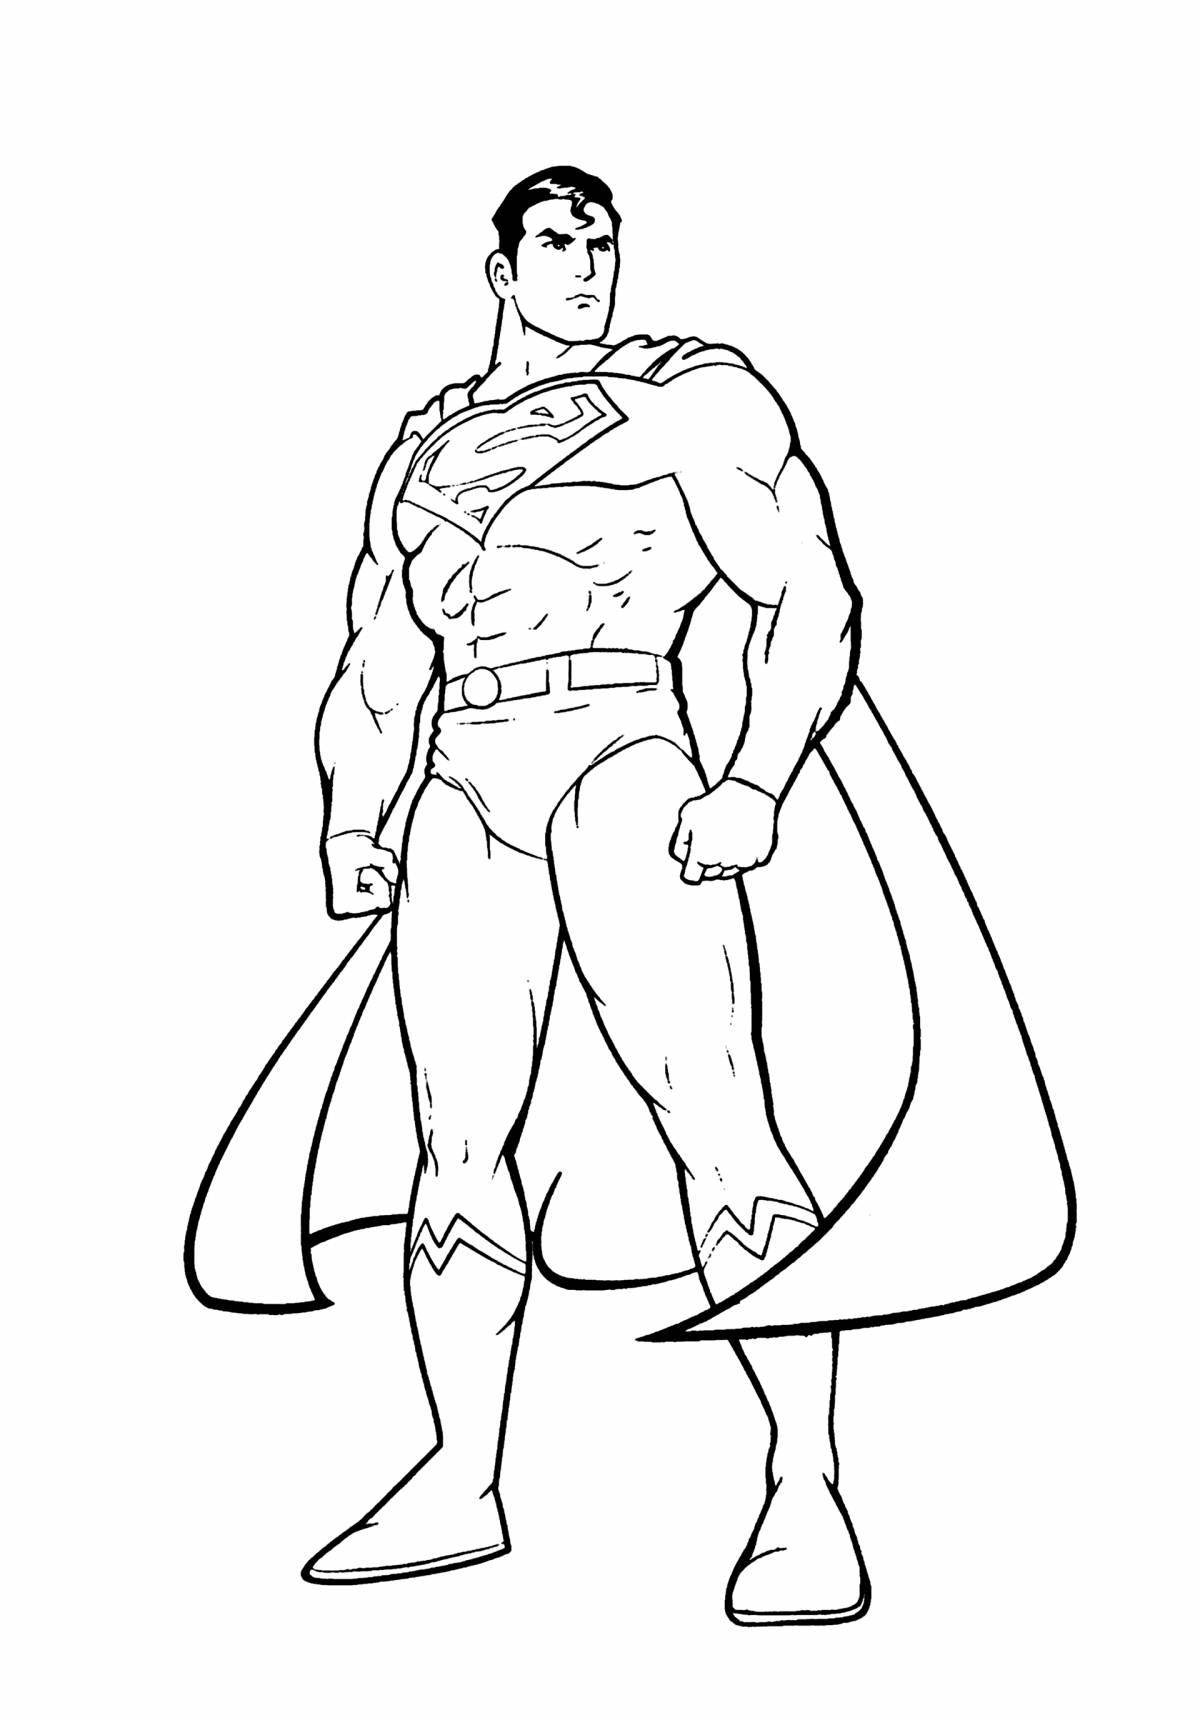 Wonderful superman coloring book for kids 3-4 years old